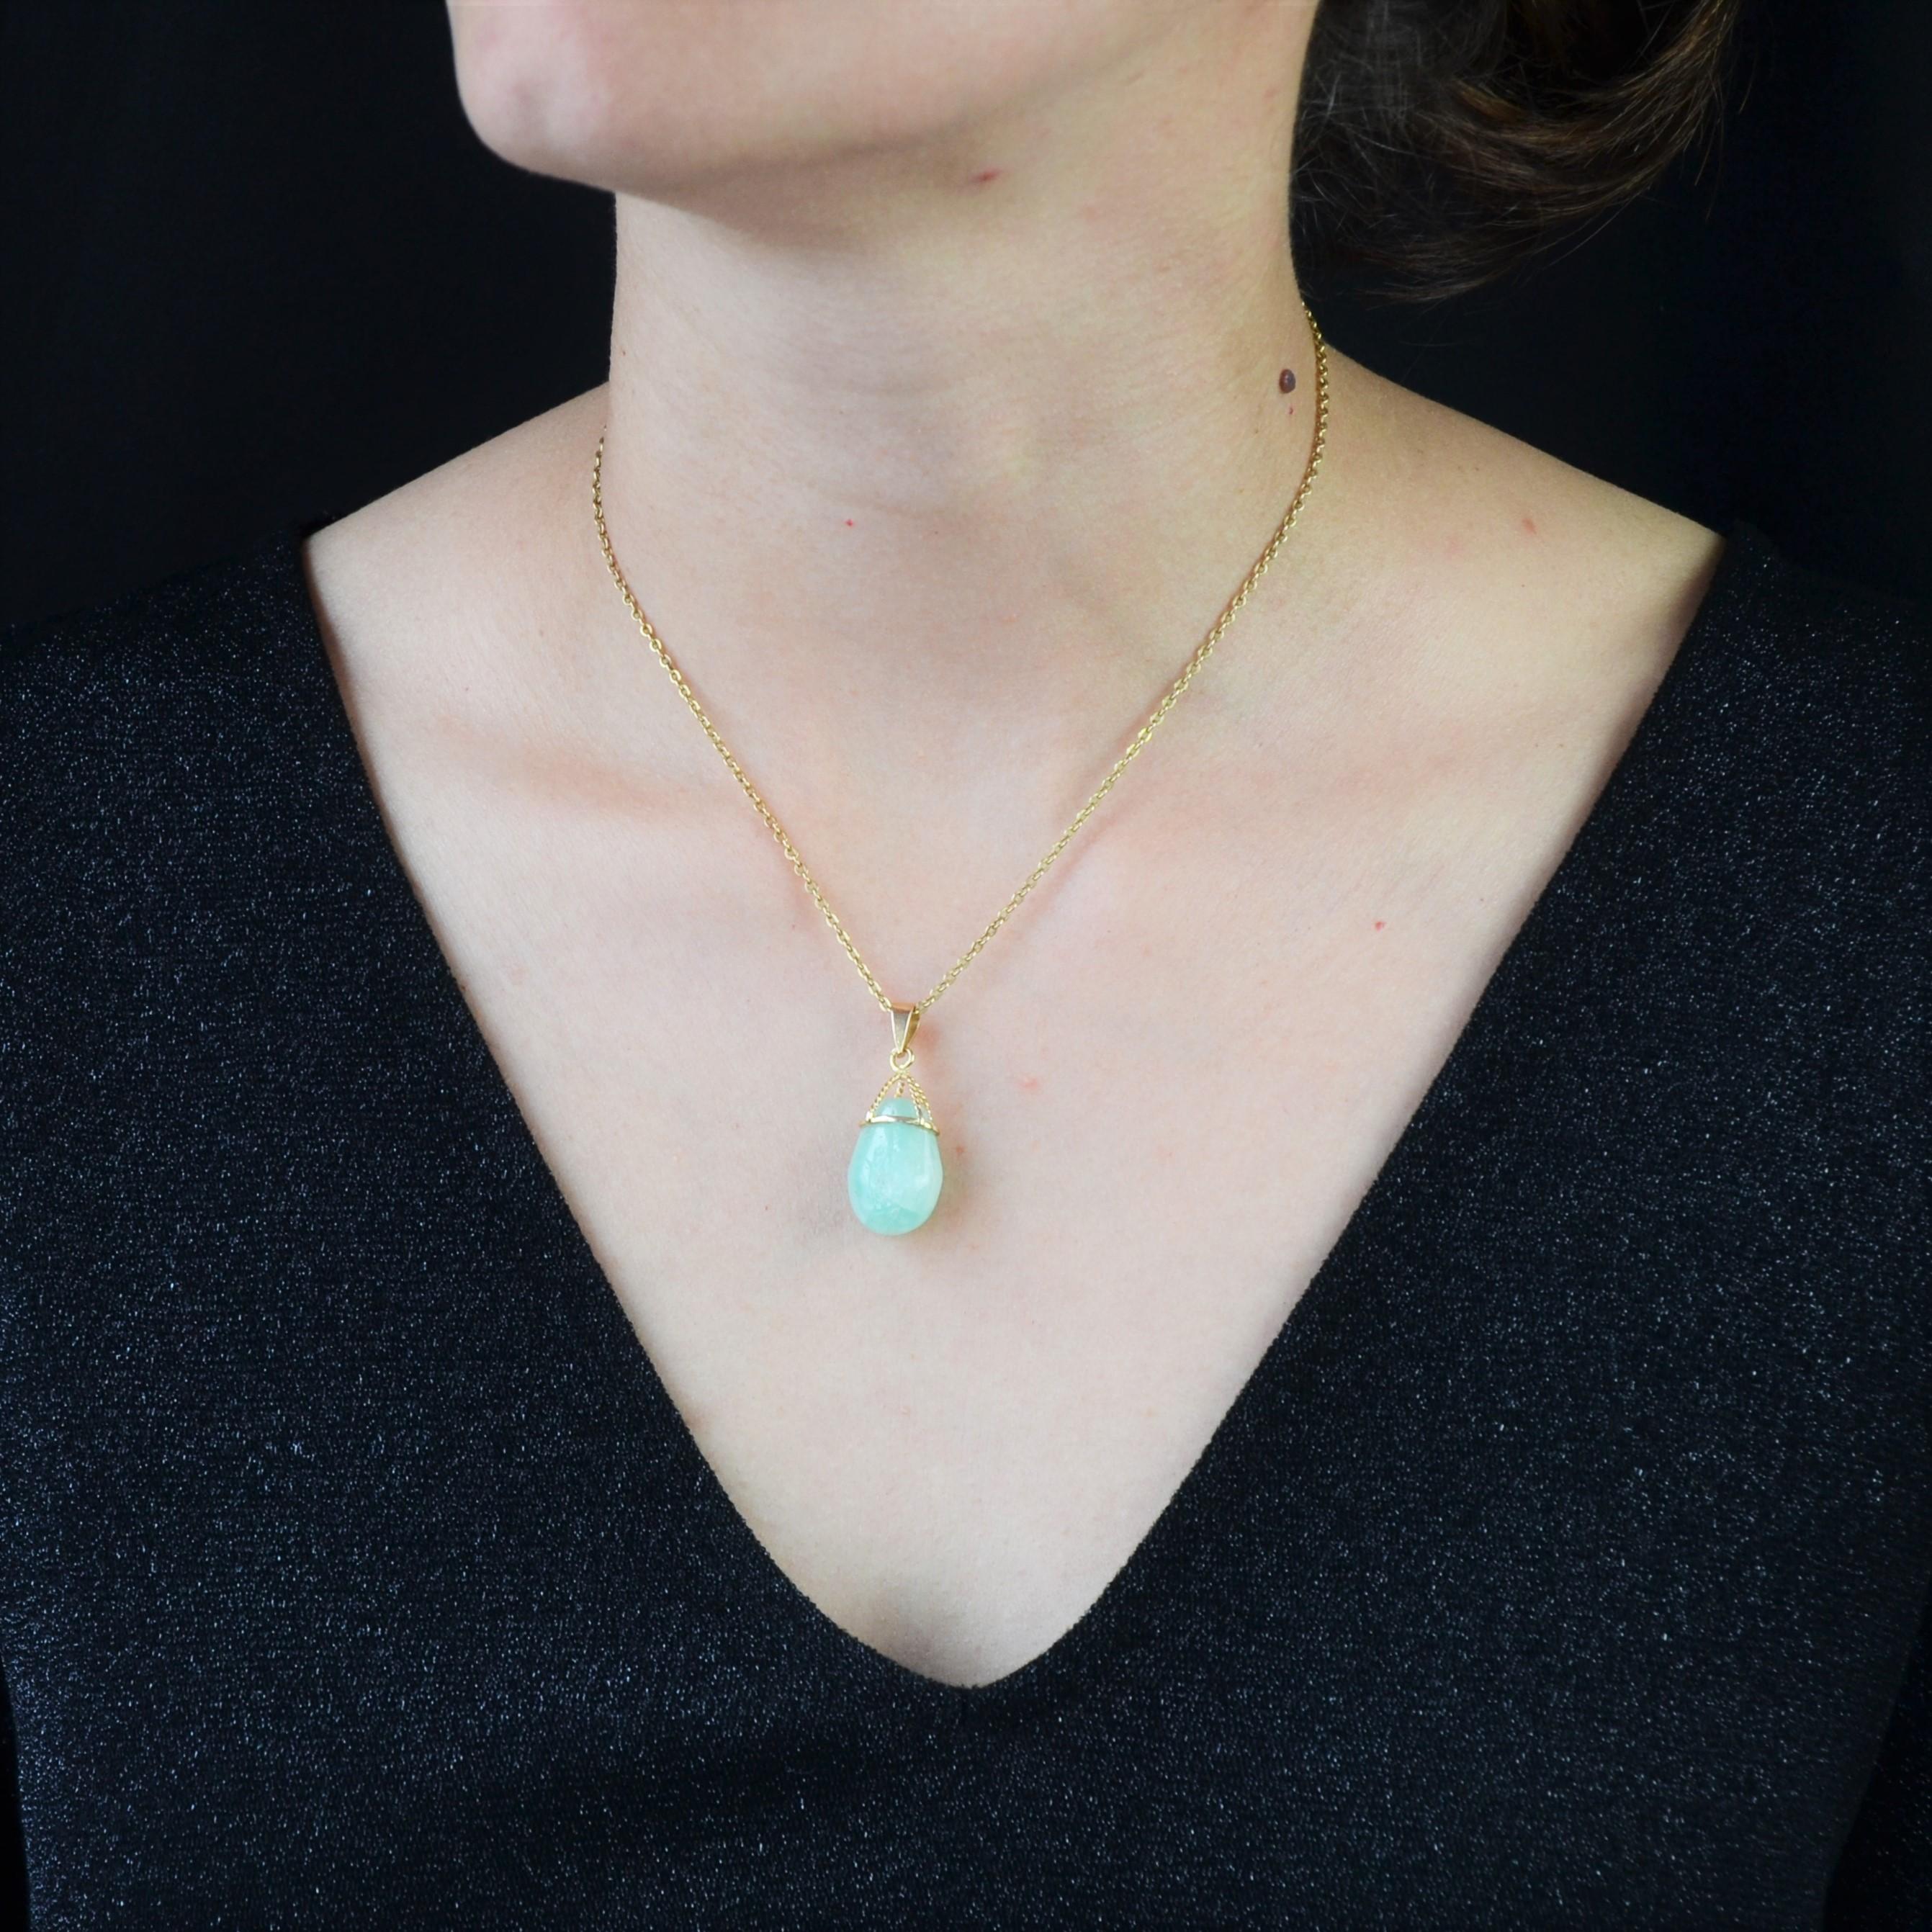 Pendant in 18 karat yellow gold.
This twisted yellow gold pendant holds an amazonite in the shape of an egg.
Total height : 3,3 cm, width at the widest : 13,7 mm, thickness at the widest : 10,3 mm approximately.
Total weight of the jewel : 5,1 g